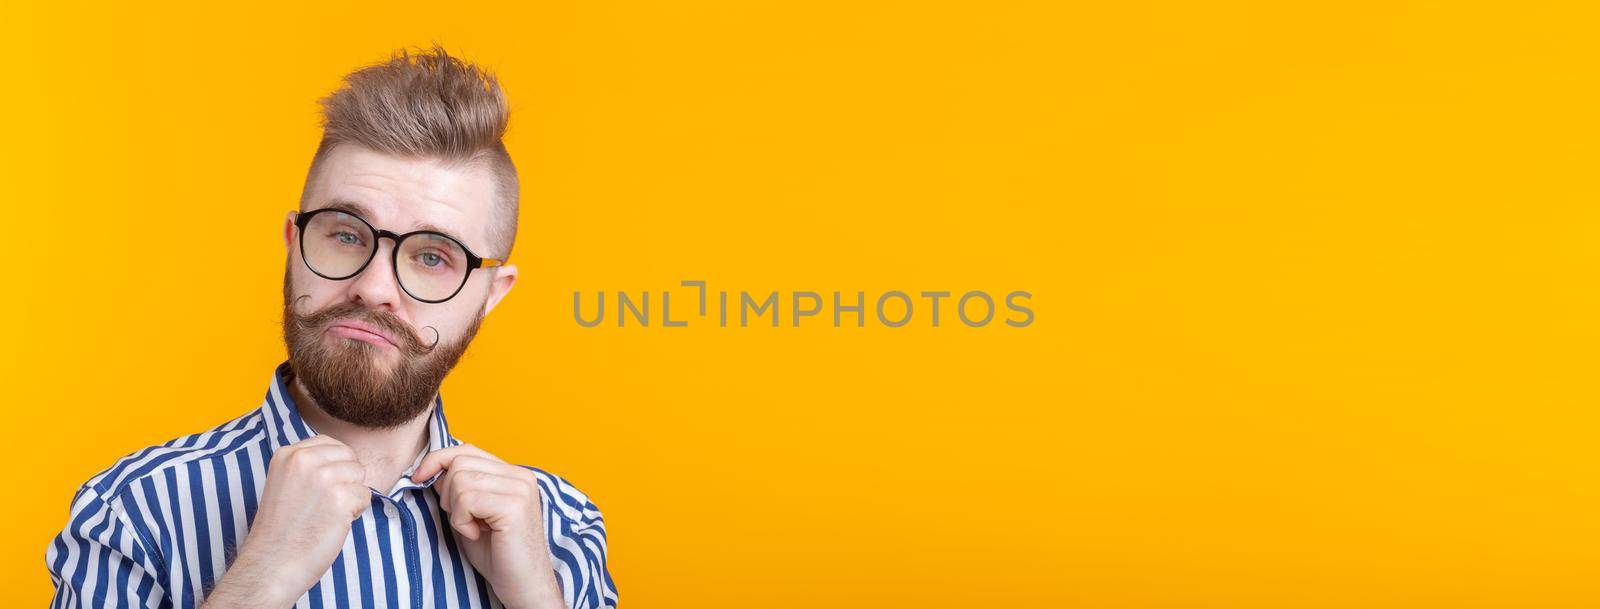 Cute young hipster student guy with a mustache and a beard with glasses straightens his shirt while posing on a yellow background banner with copy space and place for advertising. The concept of self-confidence. by Satura86